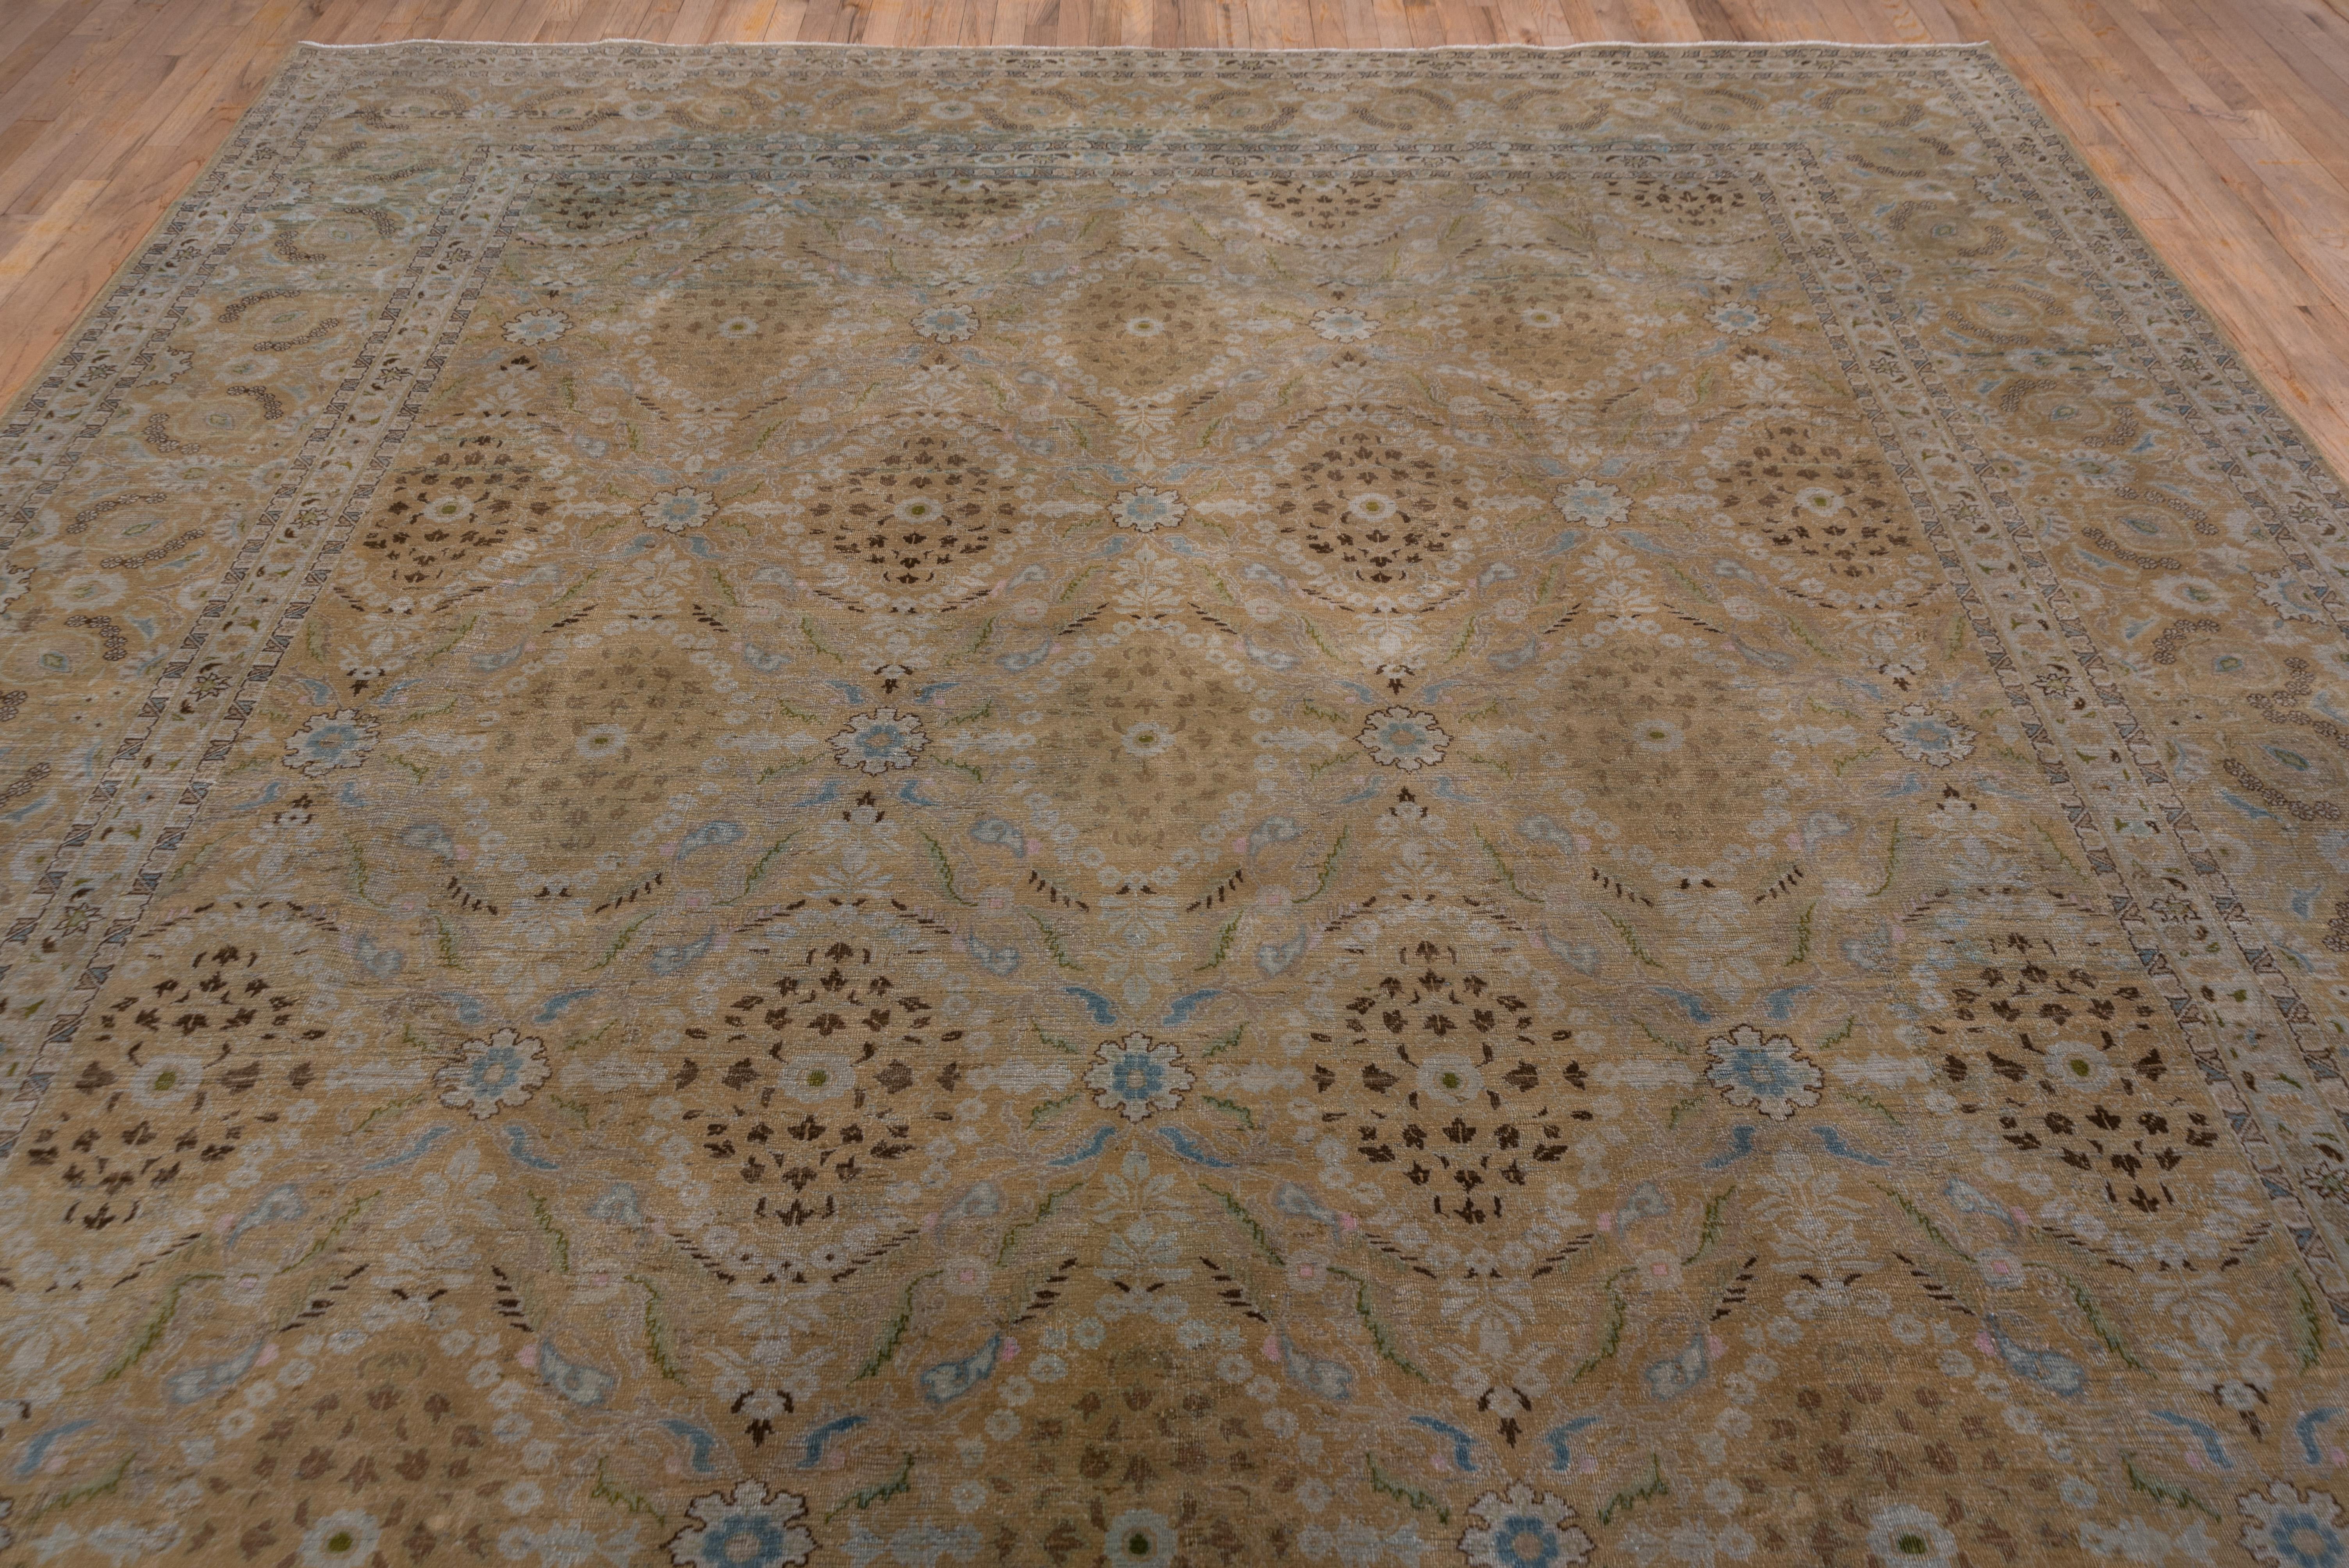 Antique Persian Meshed Carpet, Brown Field For Sale 2